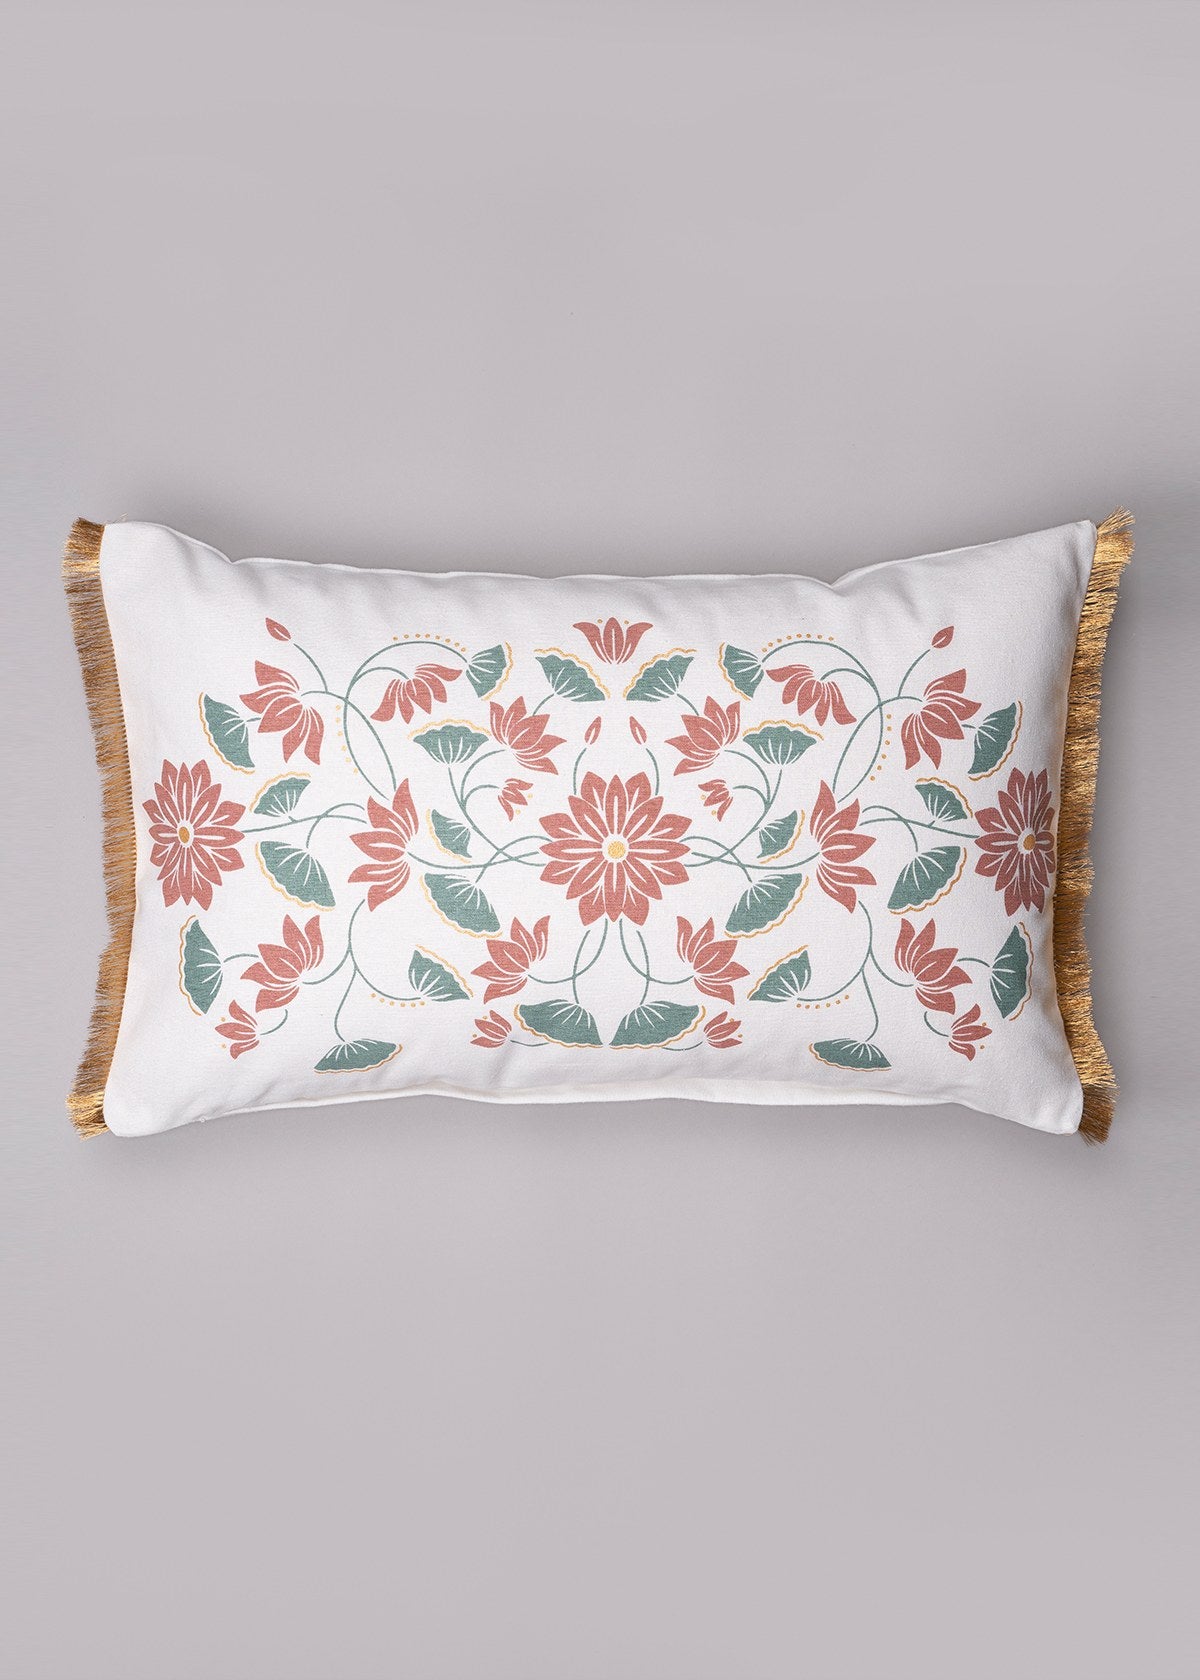 Lotus Blossom  100% cotton decorative cushion cover for sofa with gold fringe - Green